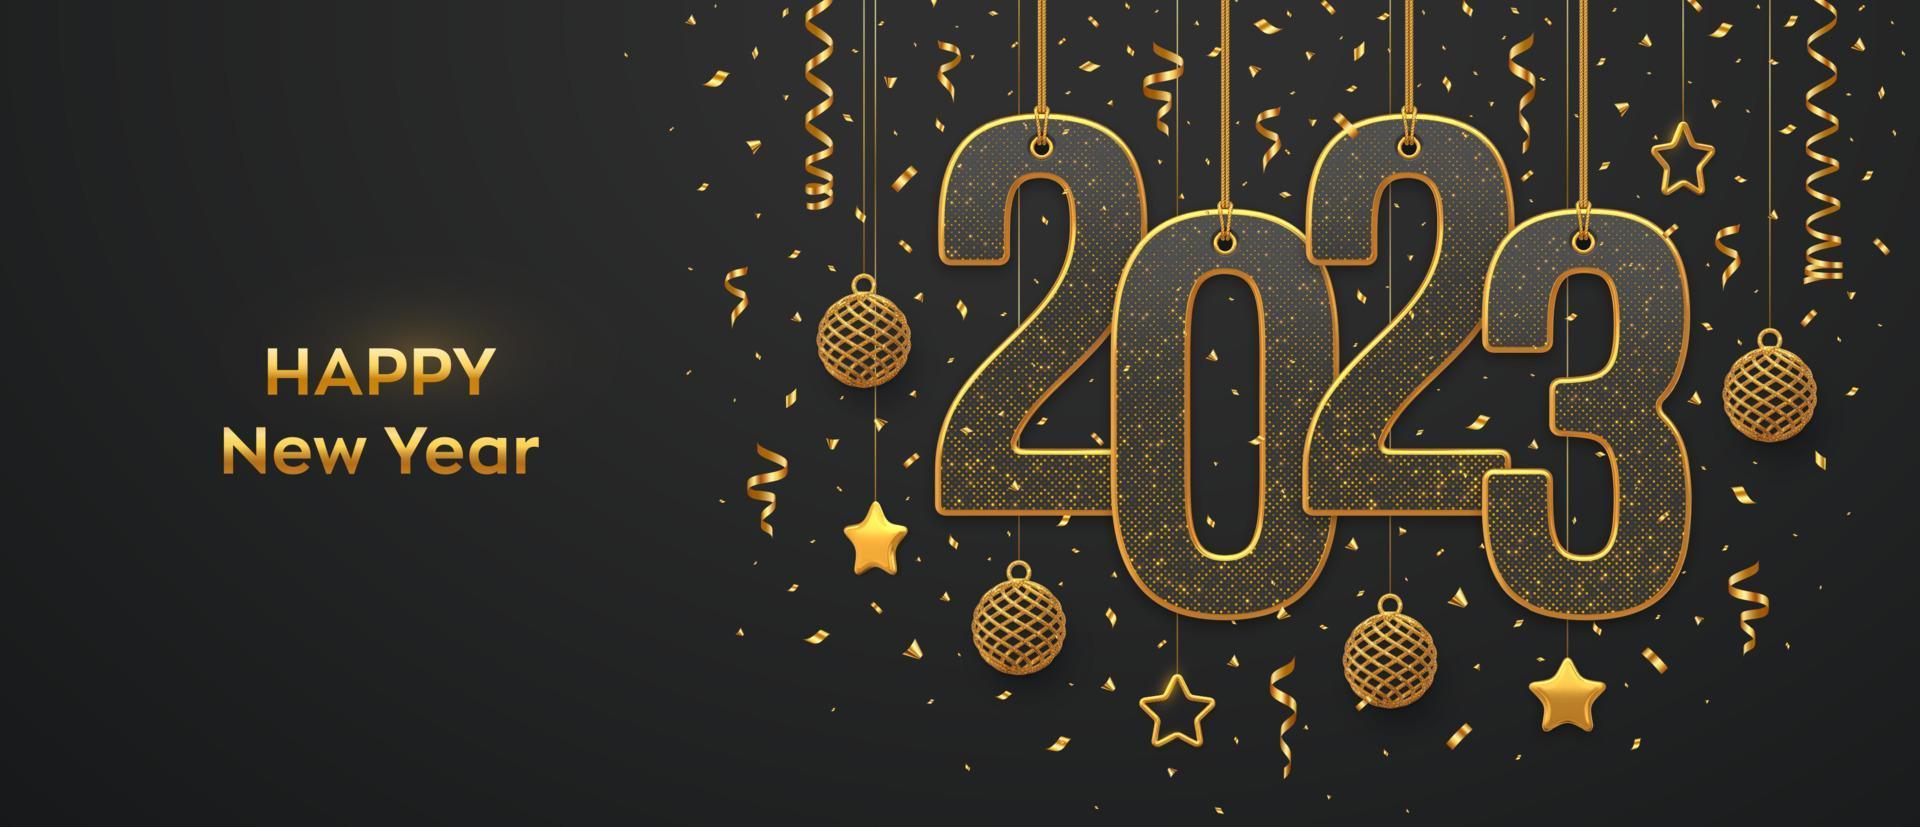 Happy New 2023 Year Hanging On Gold Ropes Numbers 2023 With Shining 3d Metallic Stars Balls And Confetti On Black Background New Year Greeting Card Banner Template Realistic Illustration Vector